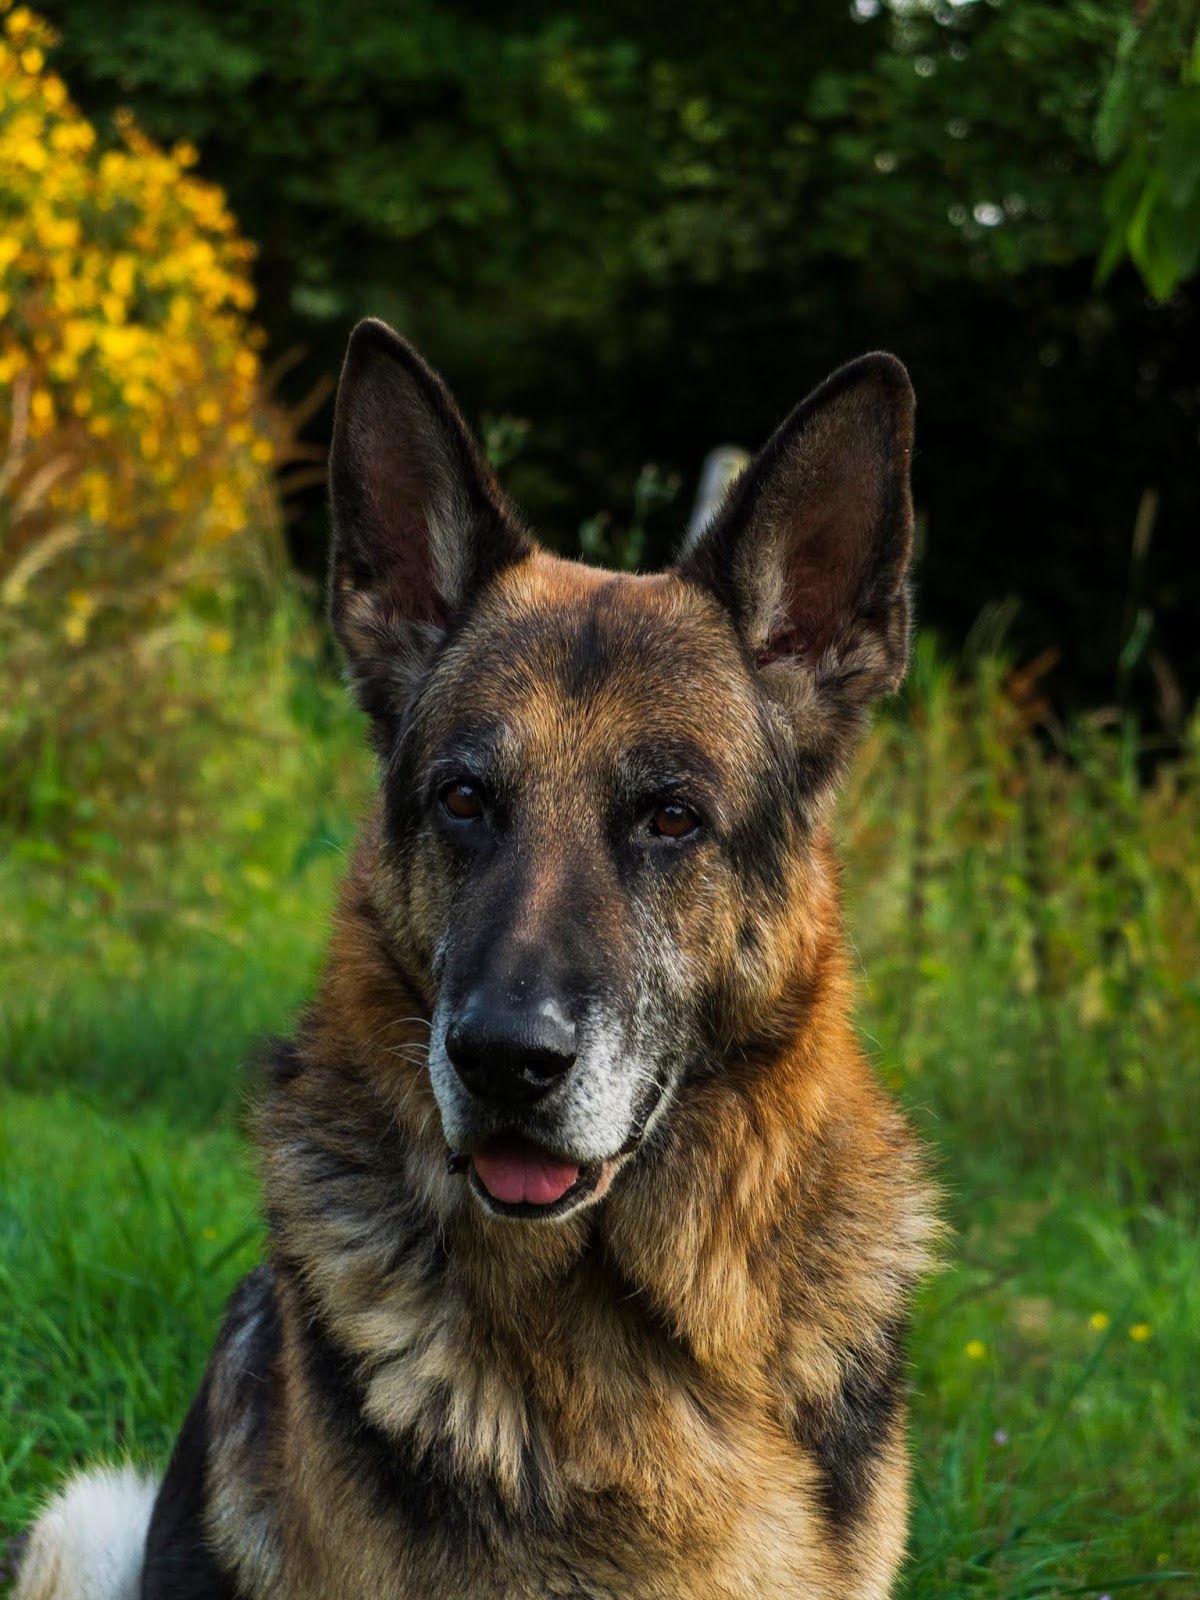 A portrait of a German Shepherd Steve looking at something to the left of the camera.